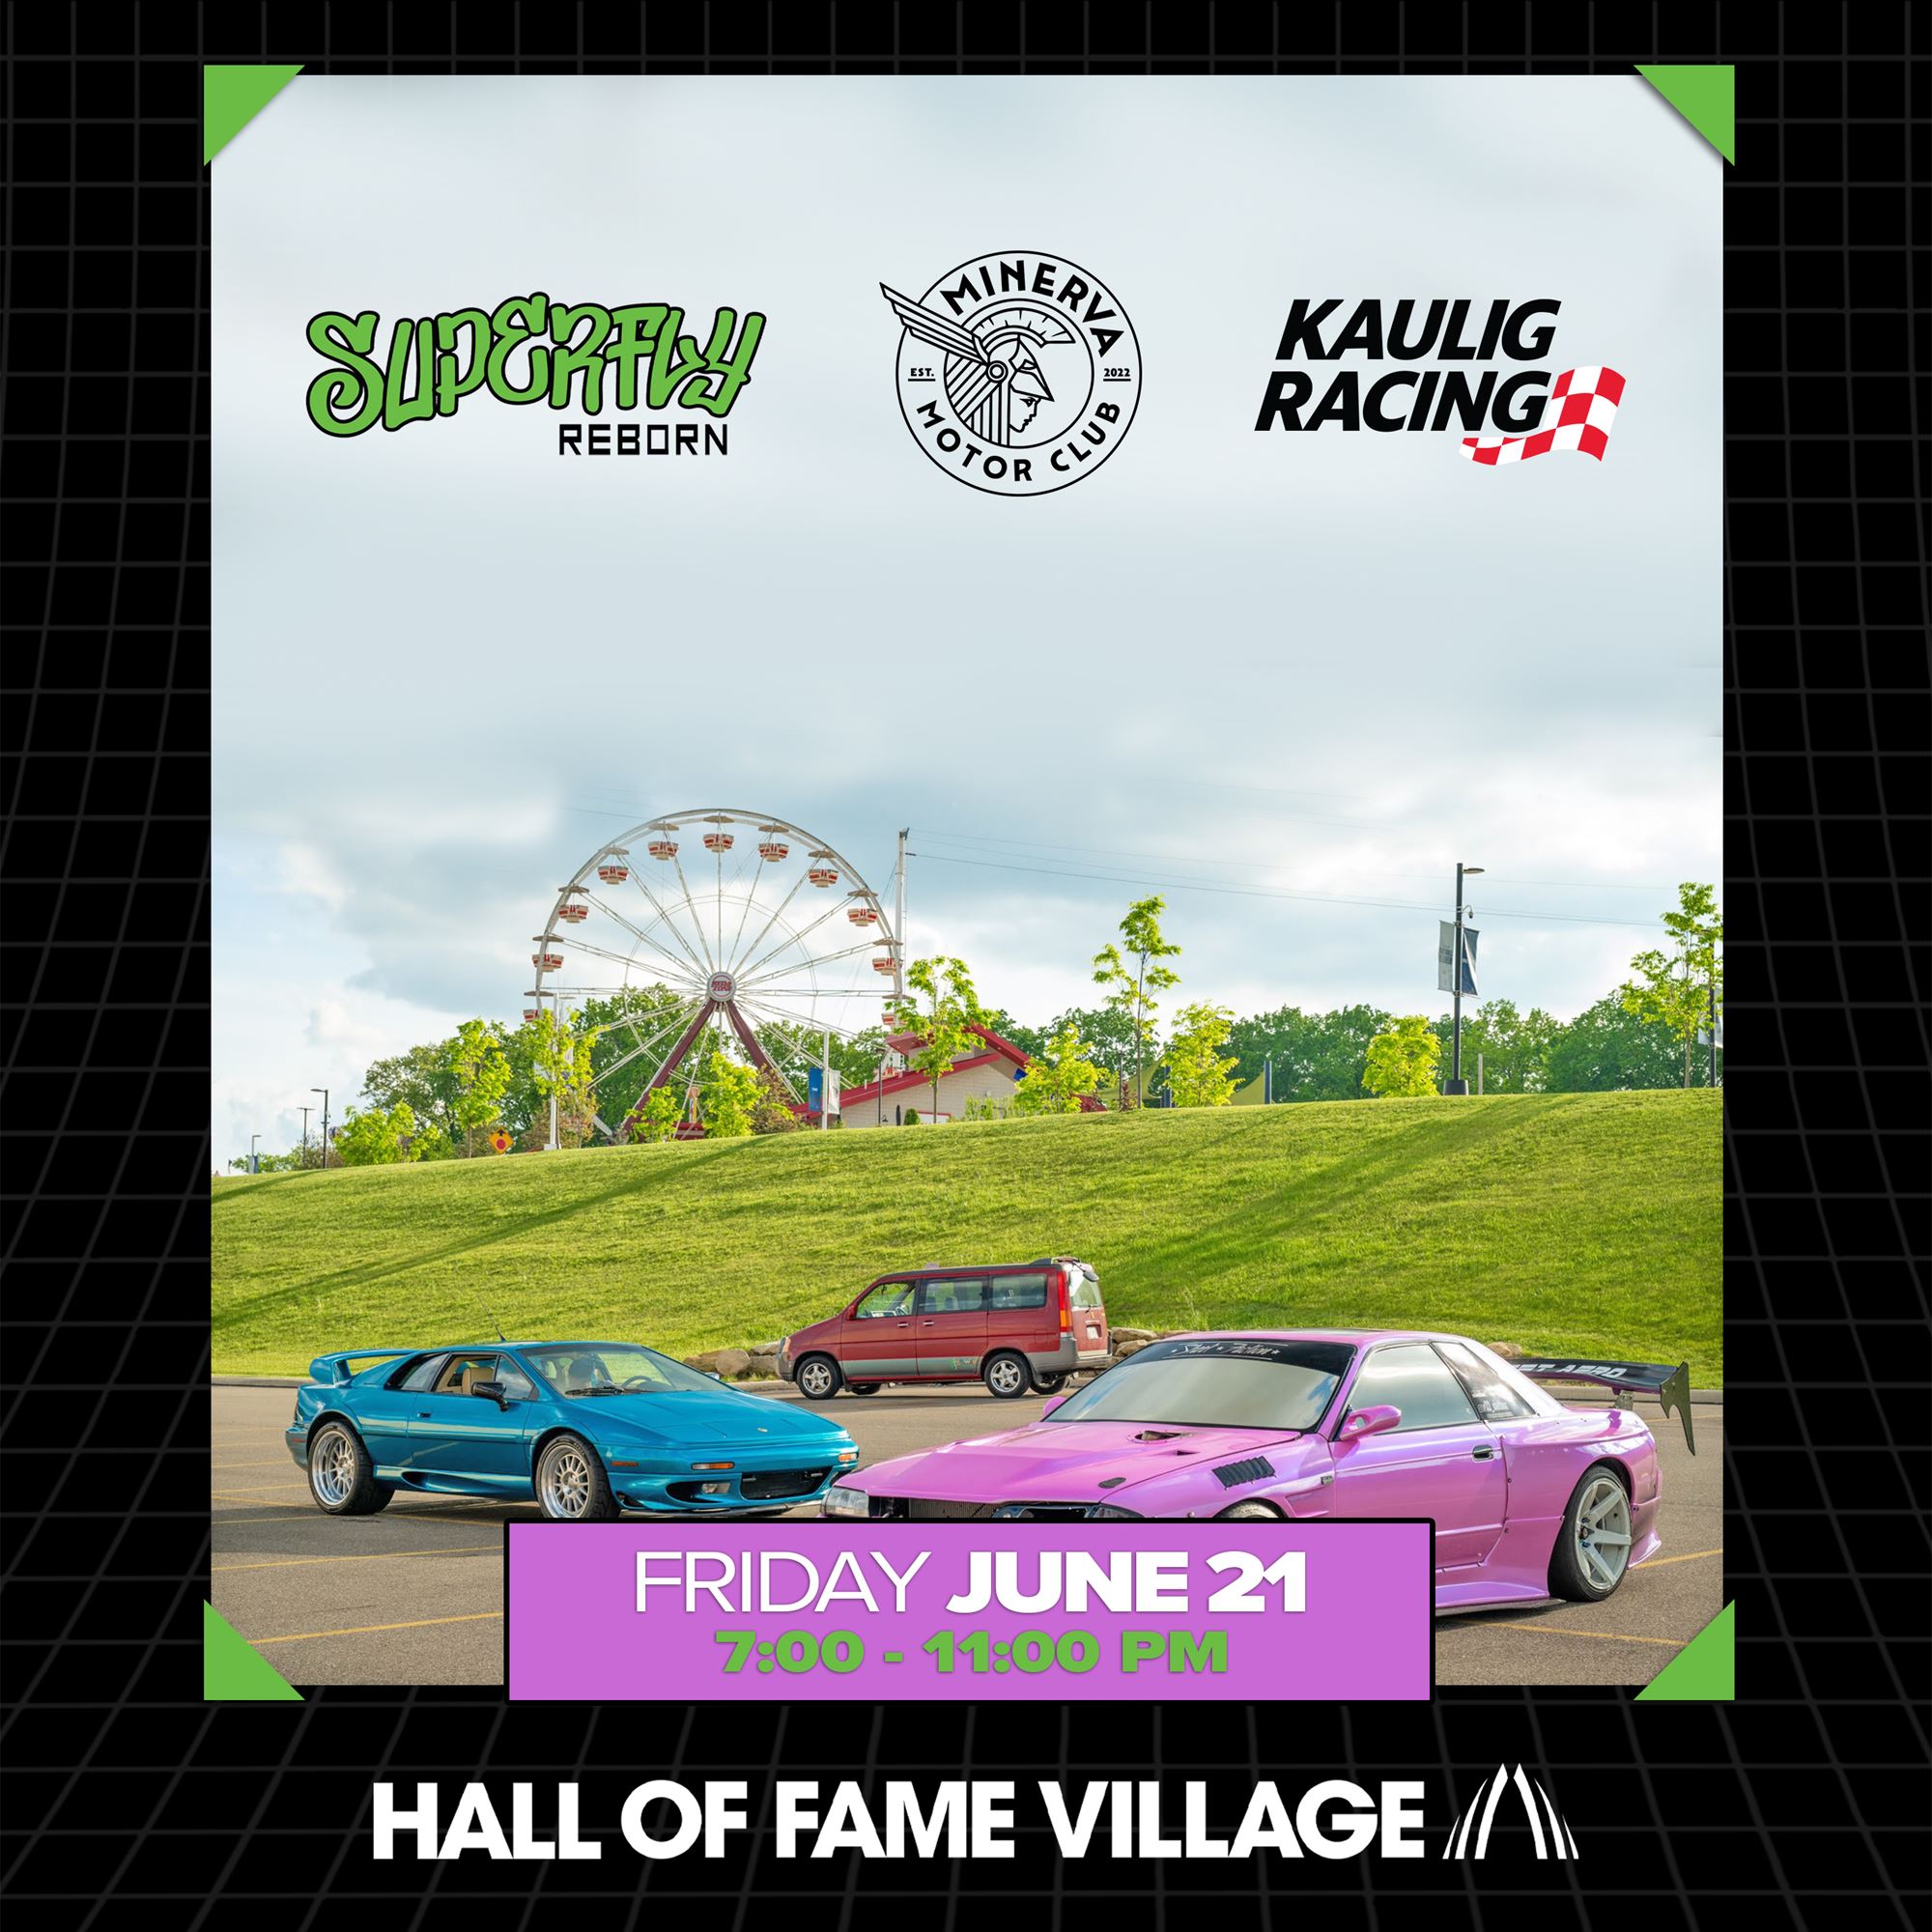 Cruisin’ & Groovin’ Car Show Weekend at Hall of Fame Village